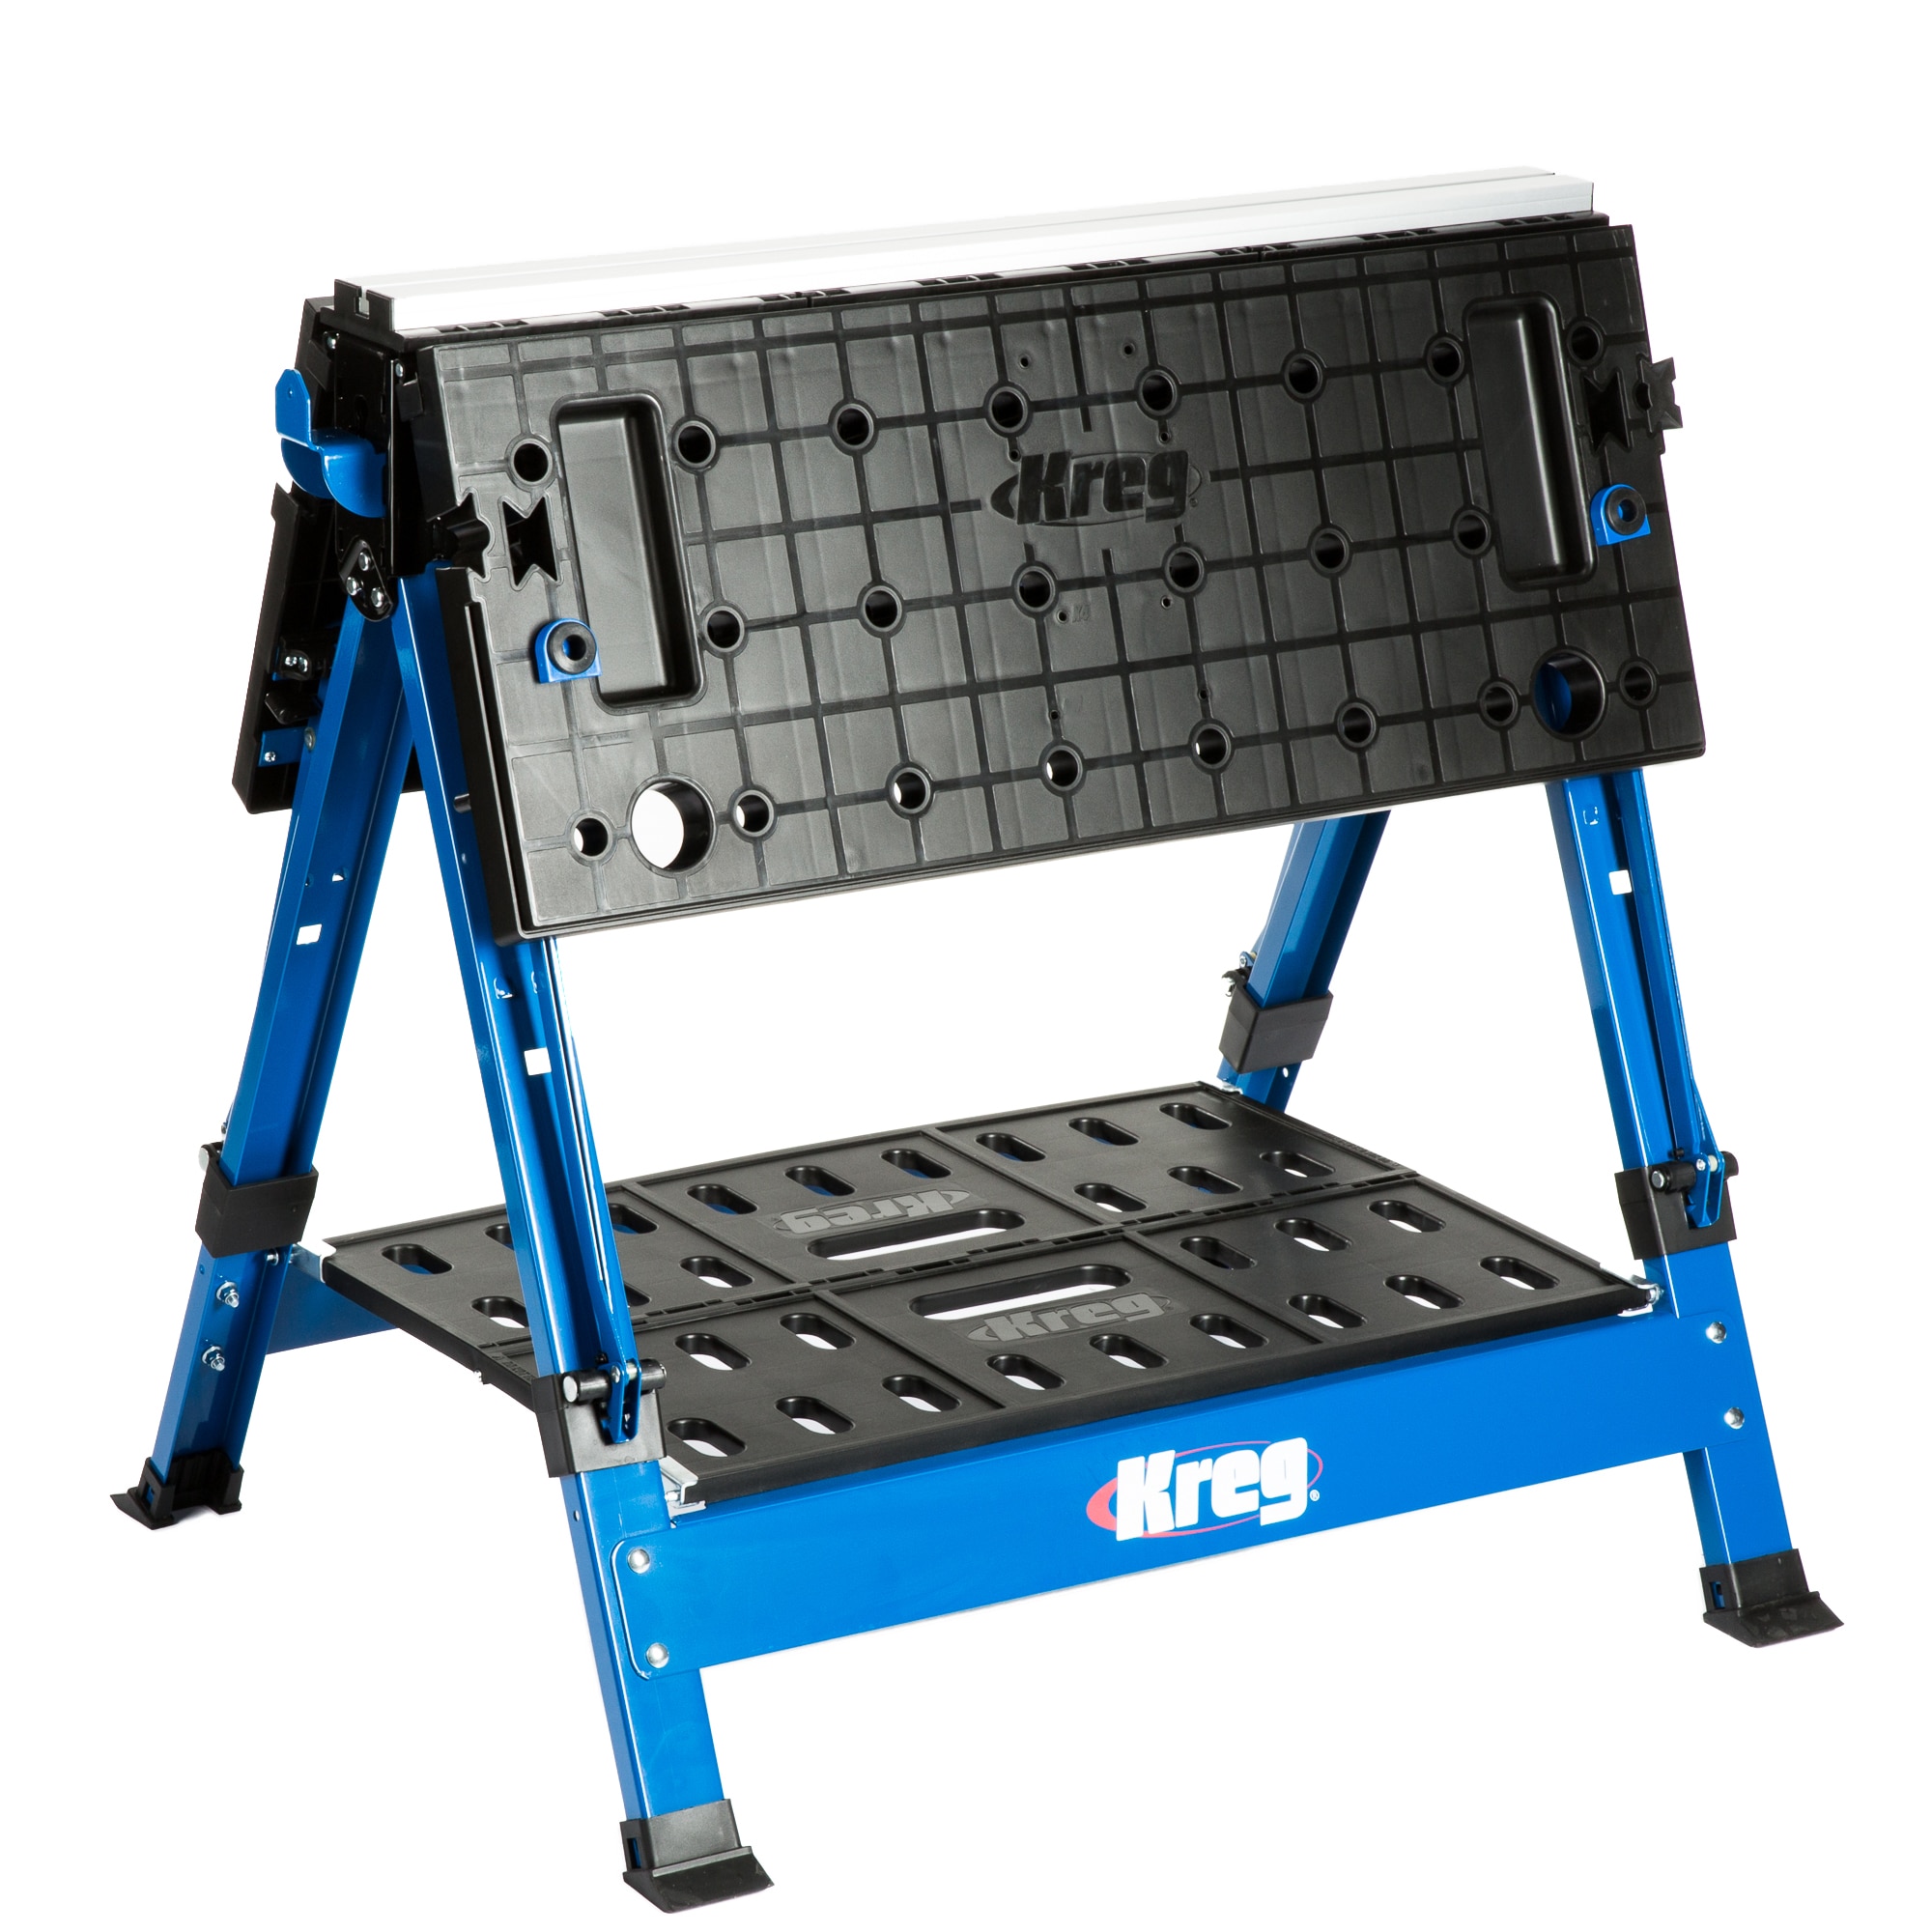 Kreg KBC3-HDSYS: The Ultimate Portable Clamping Station for Wood Projects -  Elite Tools